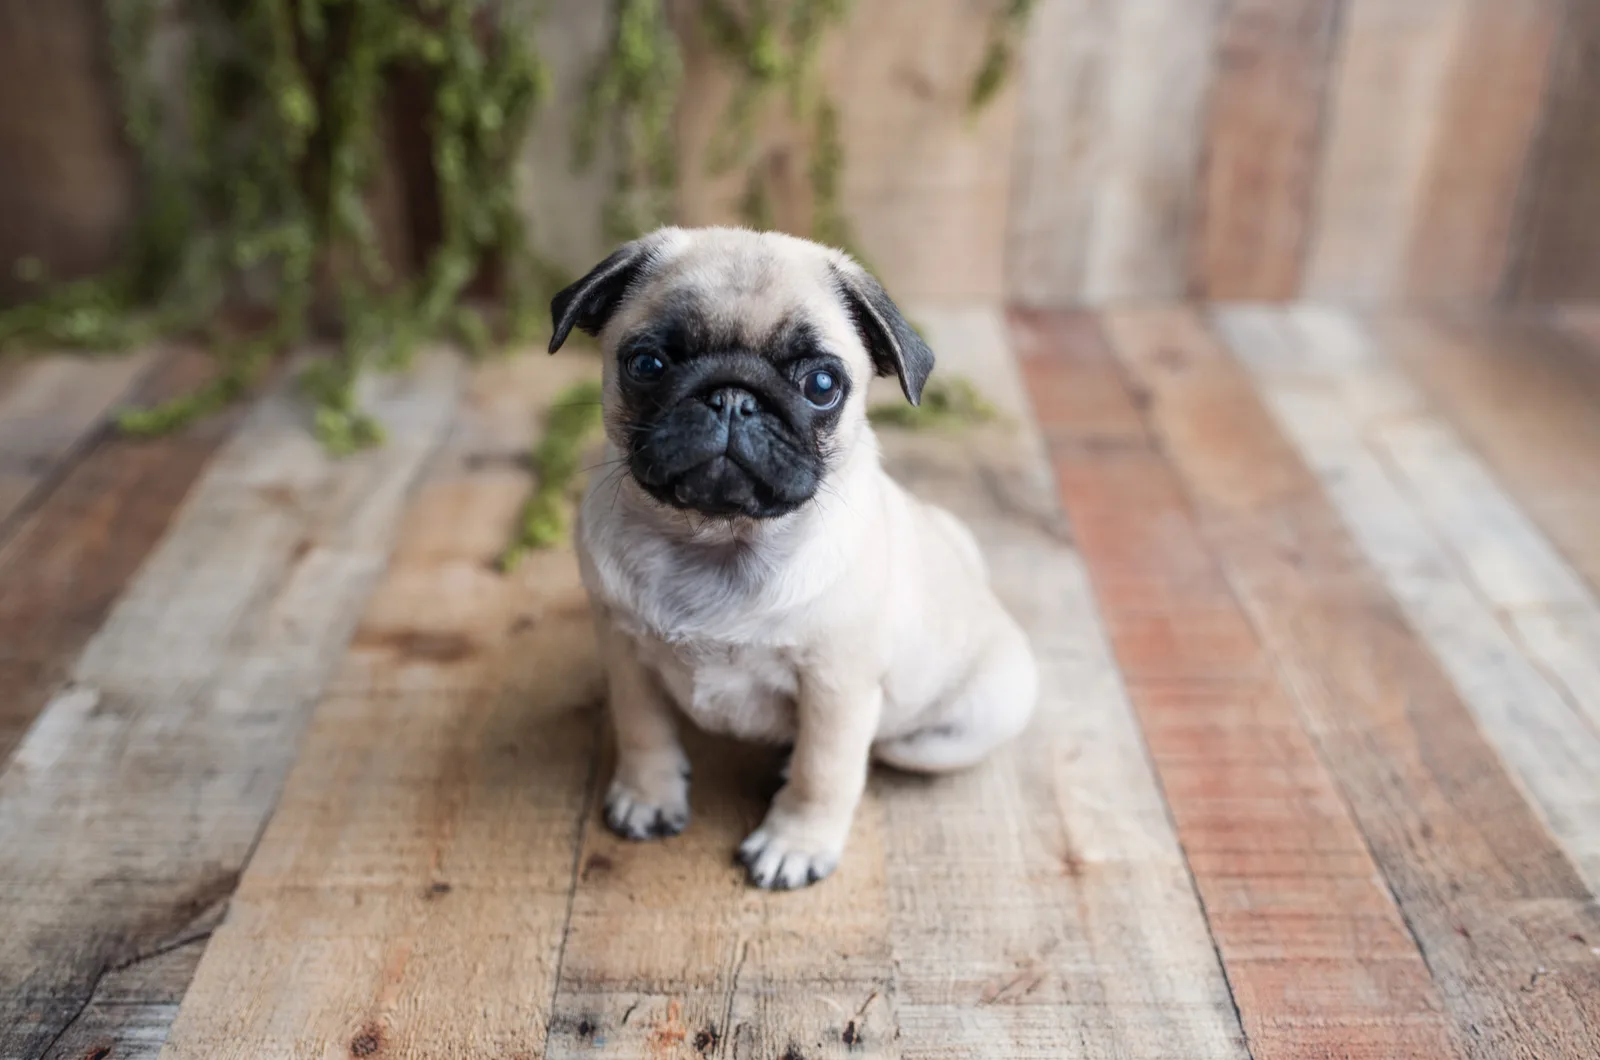 Pug puppy sitting on a wooden base